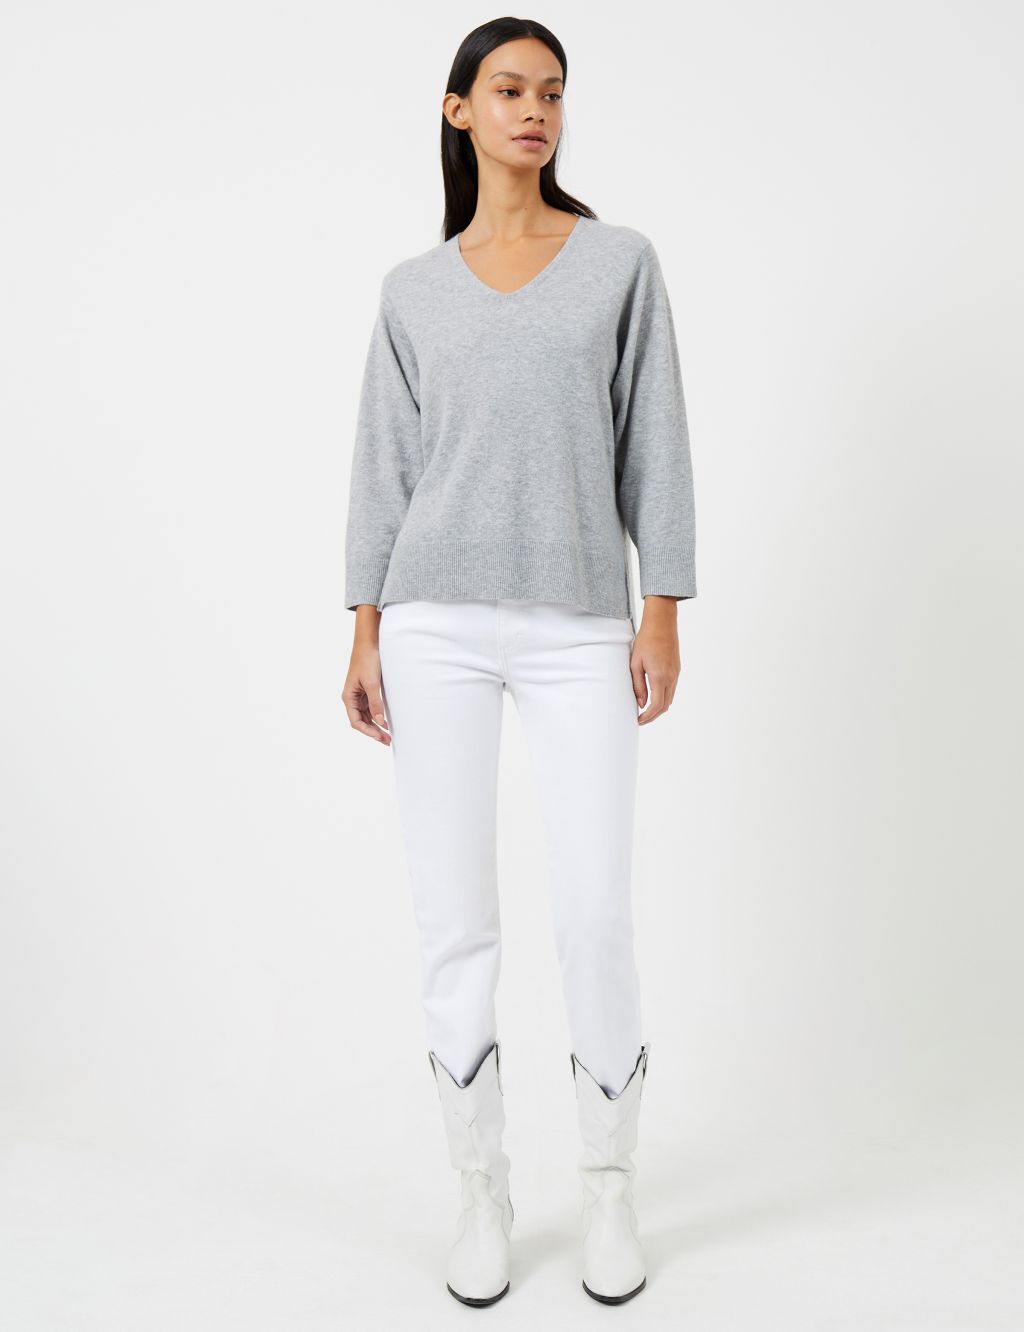 Textured V-Neck Relaxed Jumper with Wool image 1